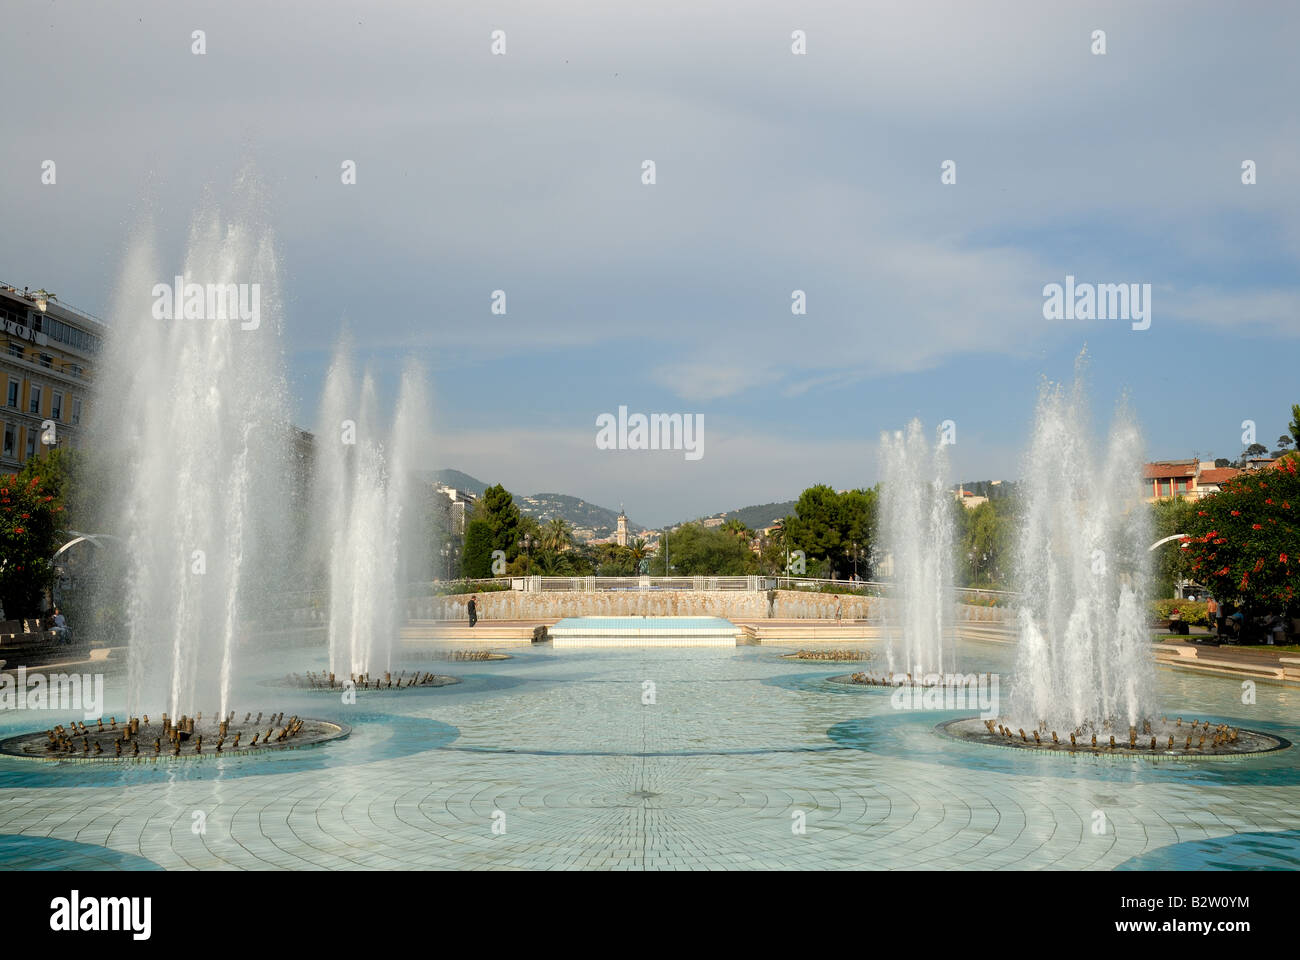 Fountains at Massena Square in Nice, France Stock Photo